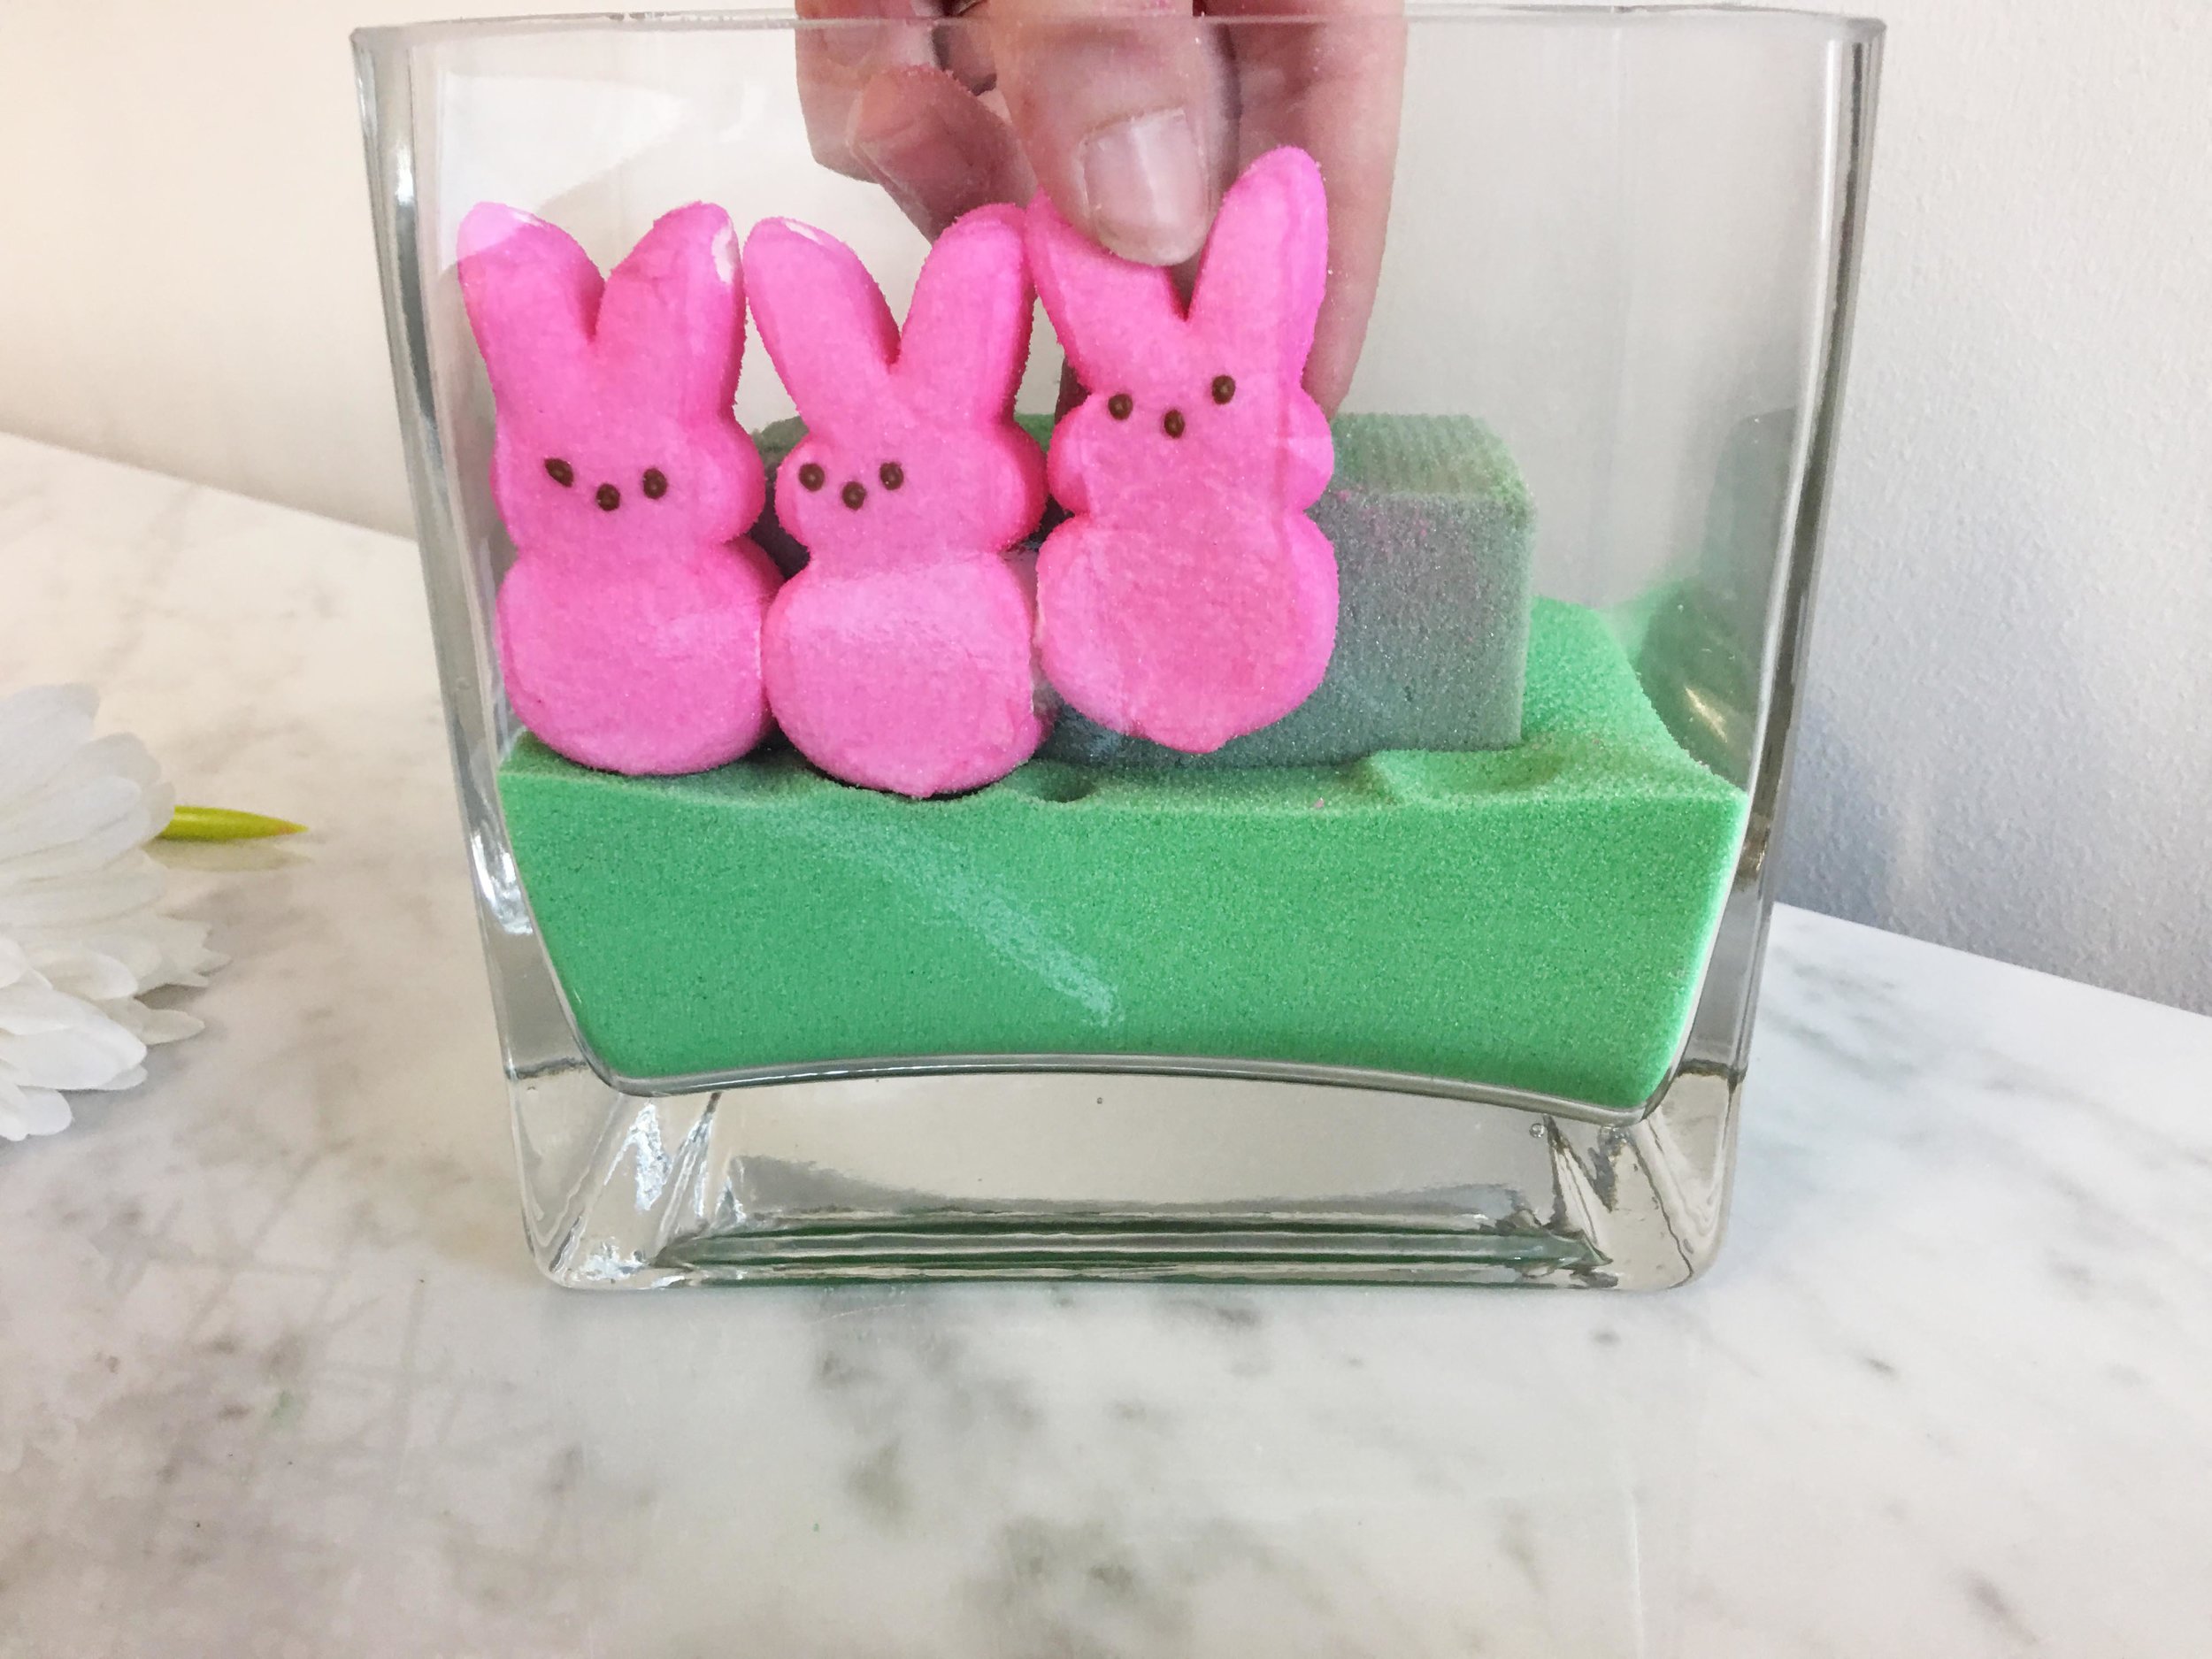 Peeps Makes Marshmallow-Scented Easter Grass